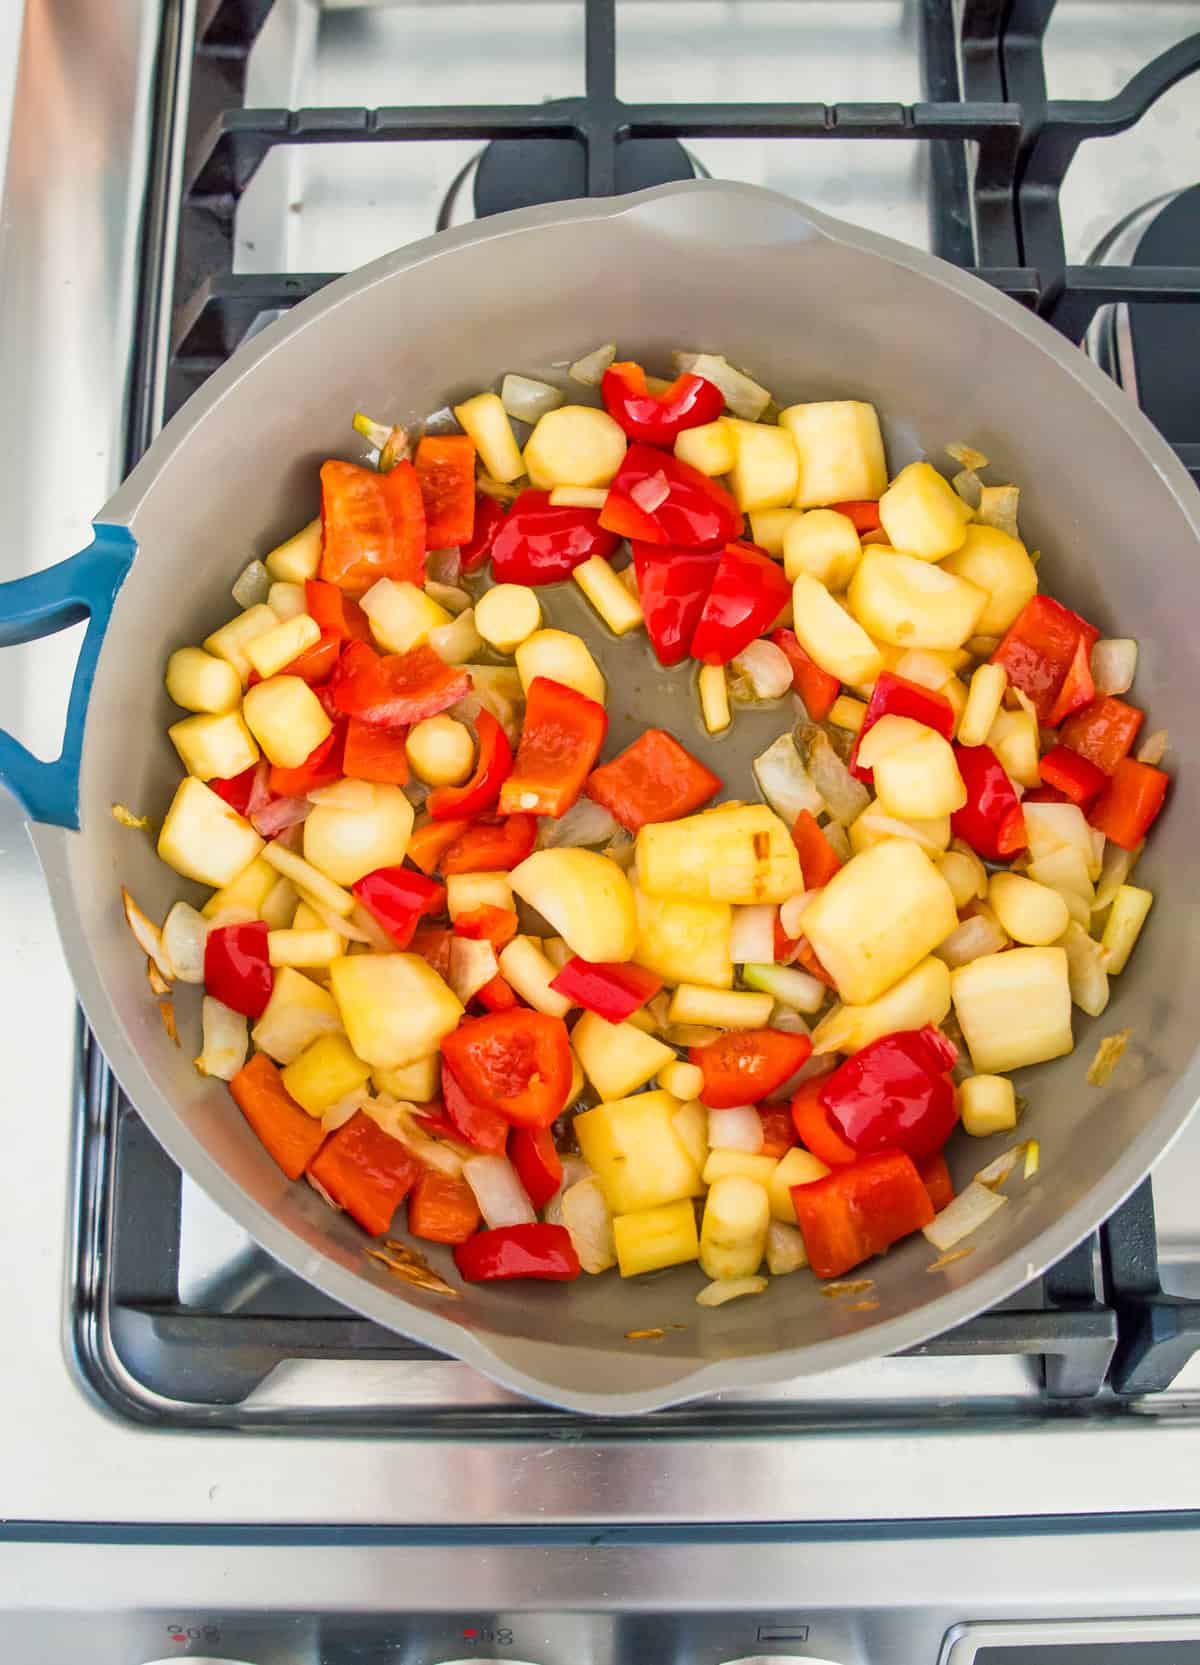 A grey pan on the stovetop with cooked chopped red bell peppers, parsnips and onions in it.